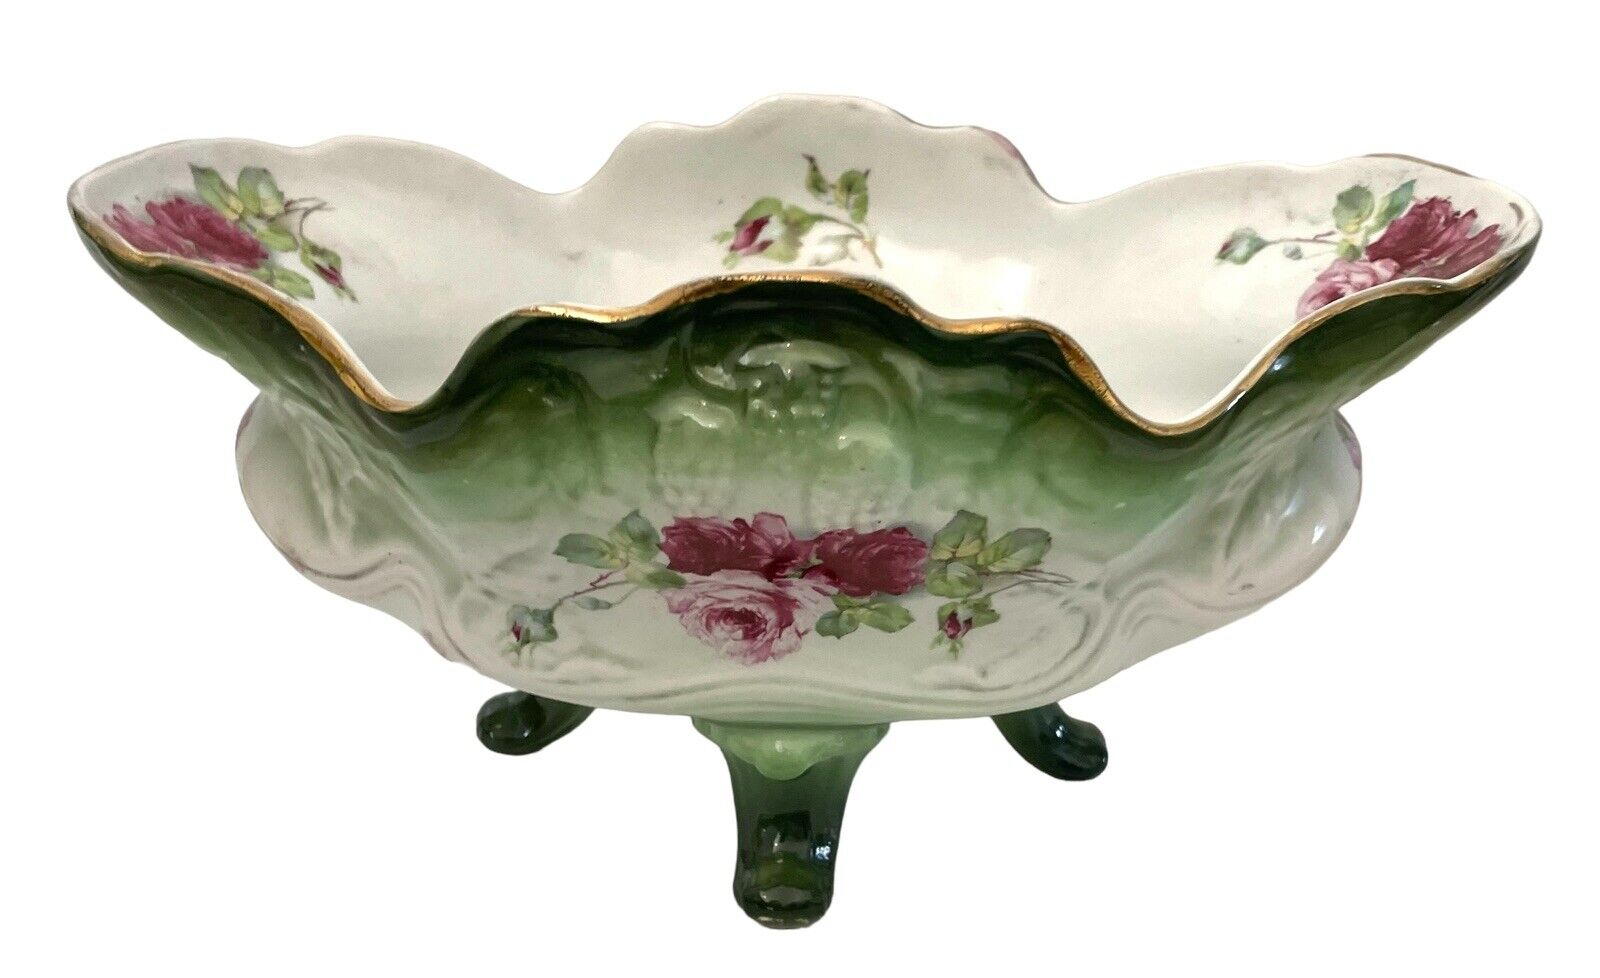 Antique La Belle China Bowl in Green Pink Roses, Marked WP, late 1800’s